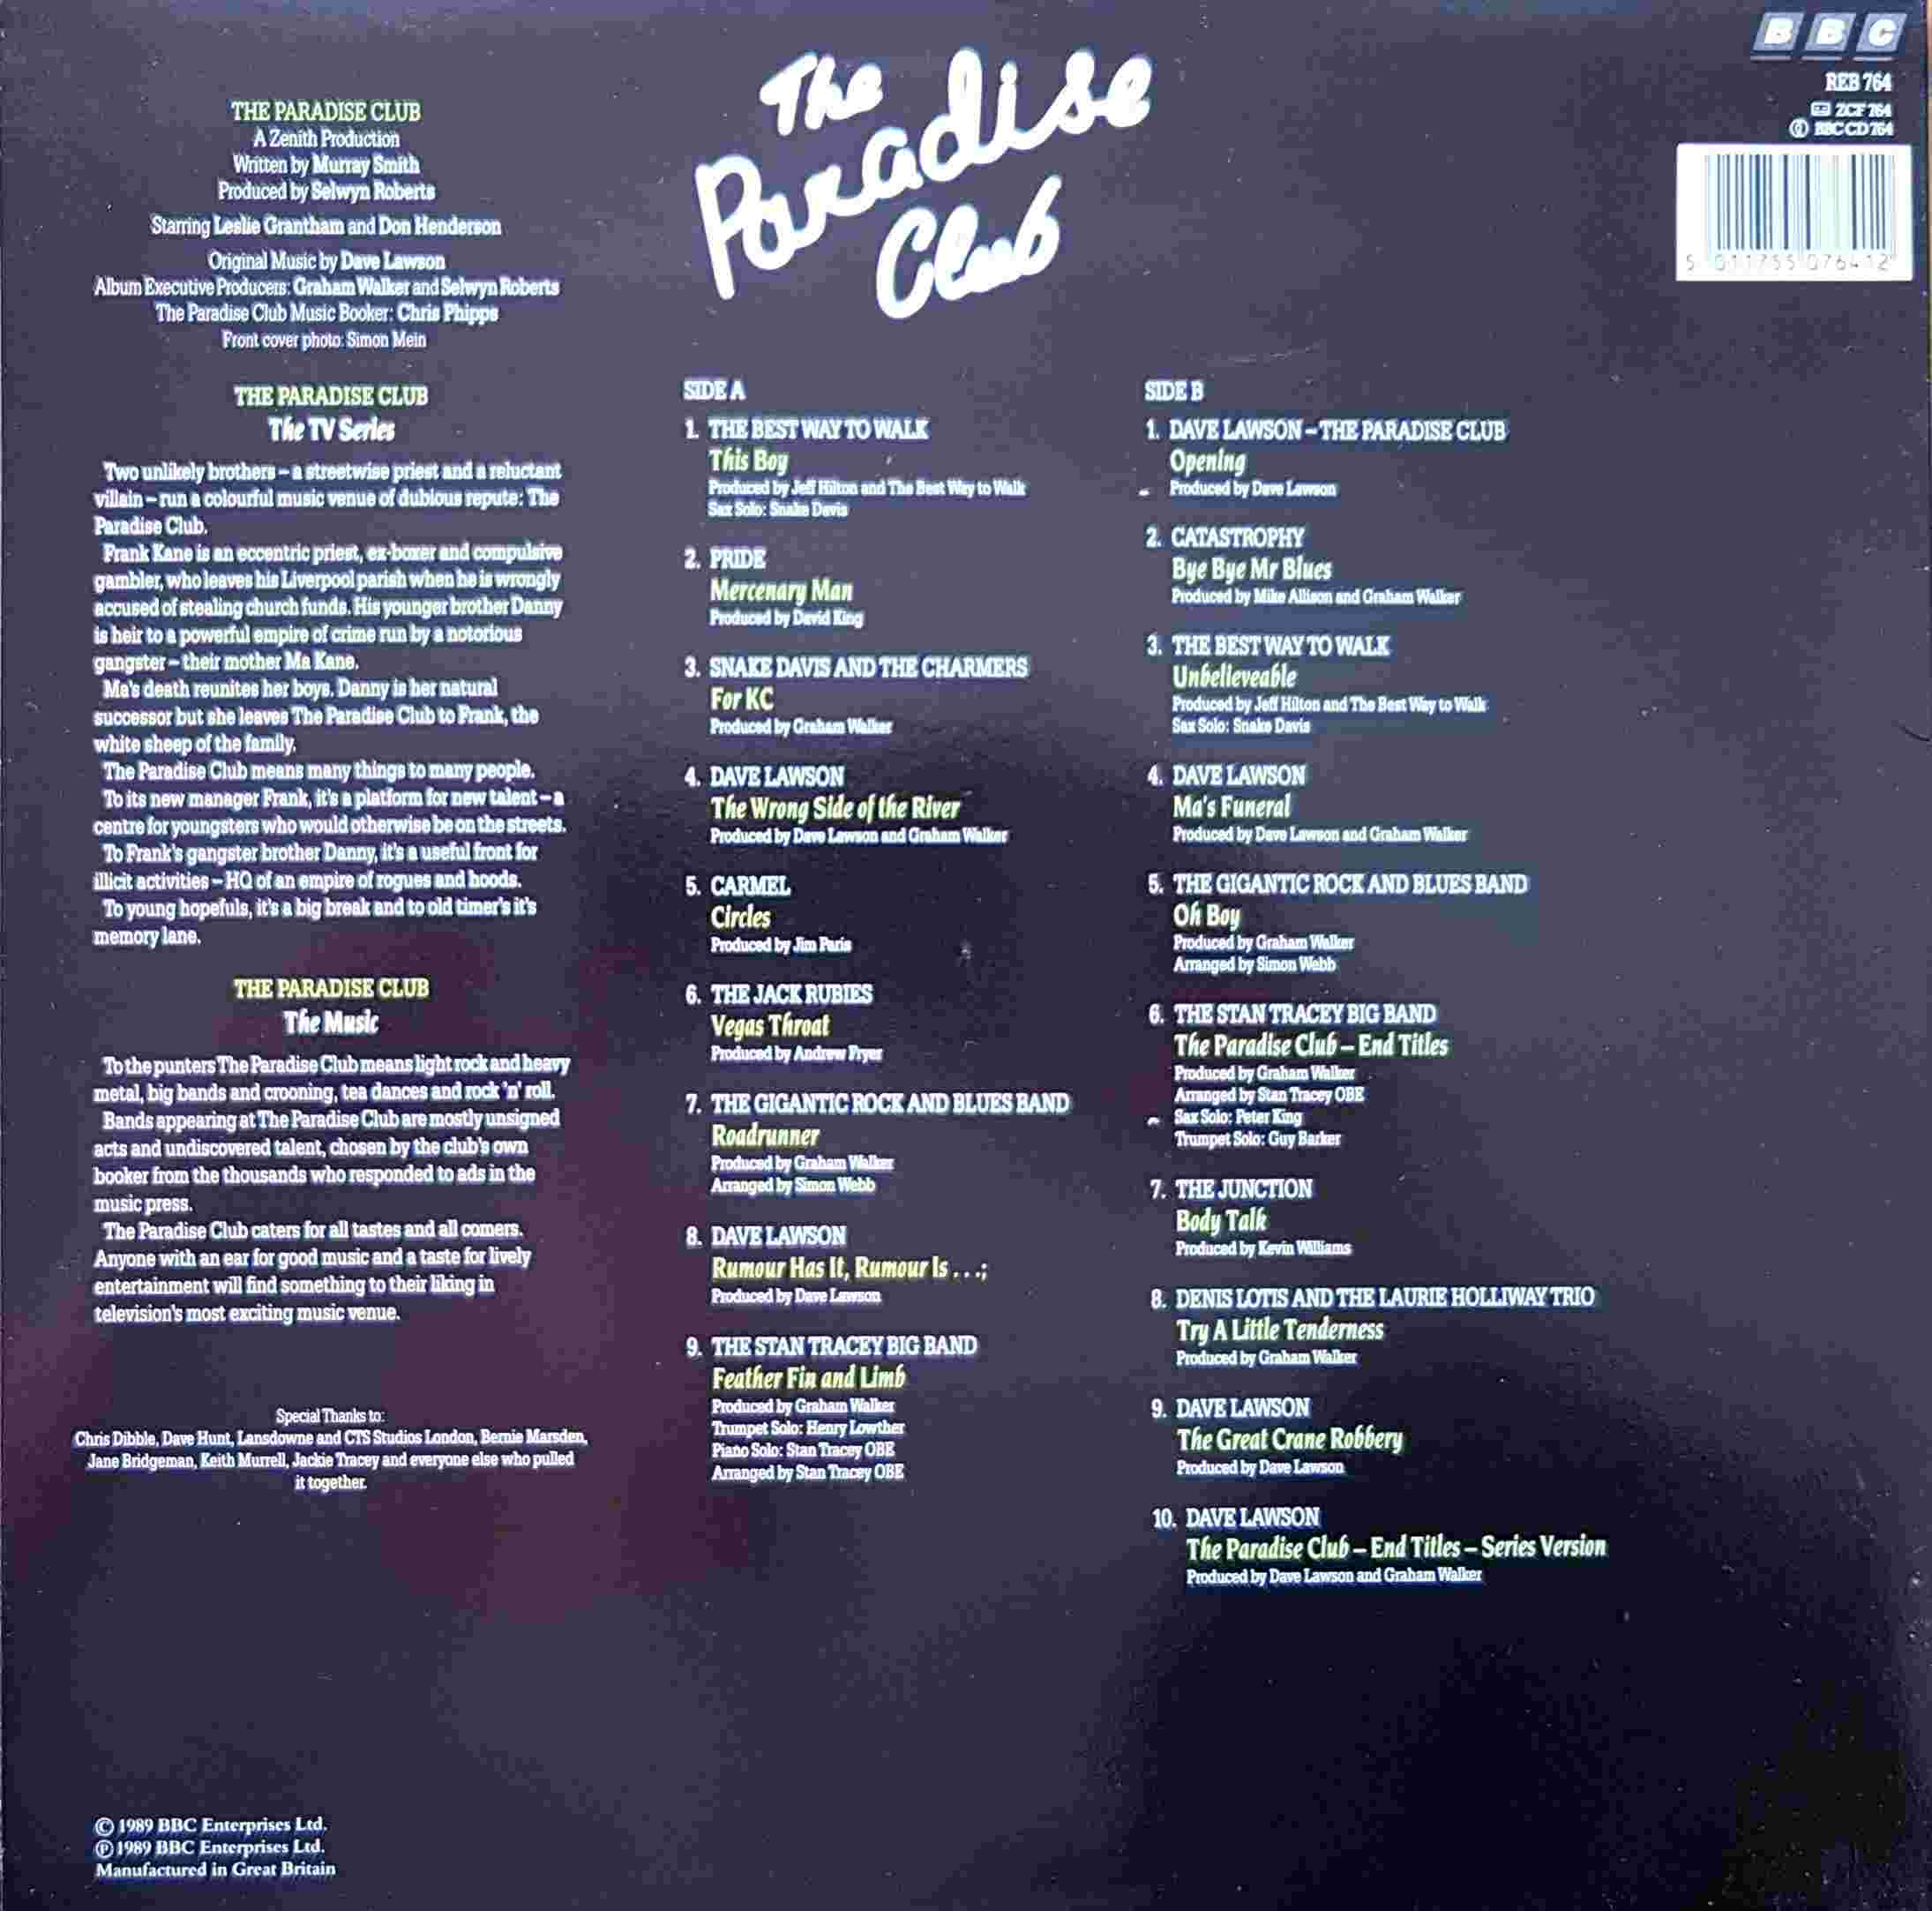 Picture of REB 764 The Paradise Club by artist Various from the BBC records and Tapes library